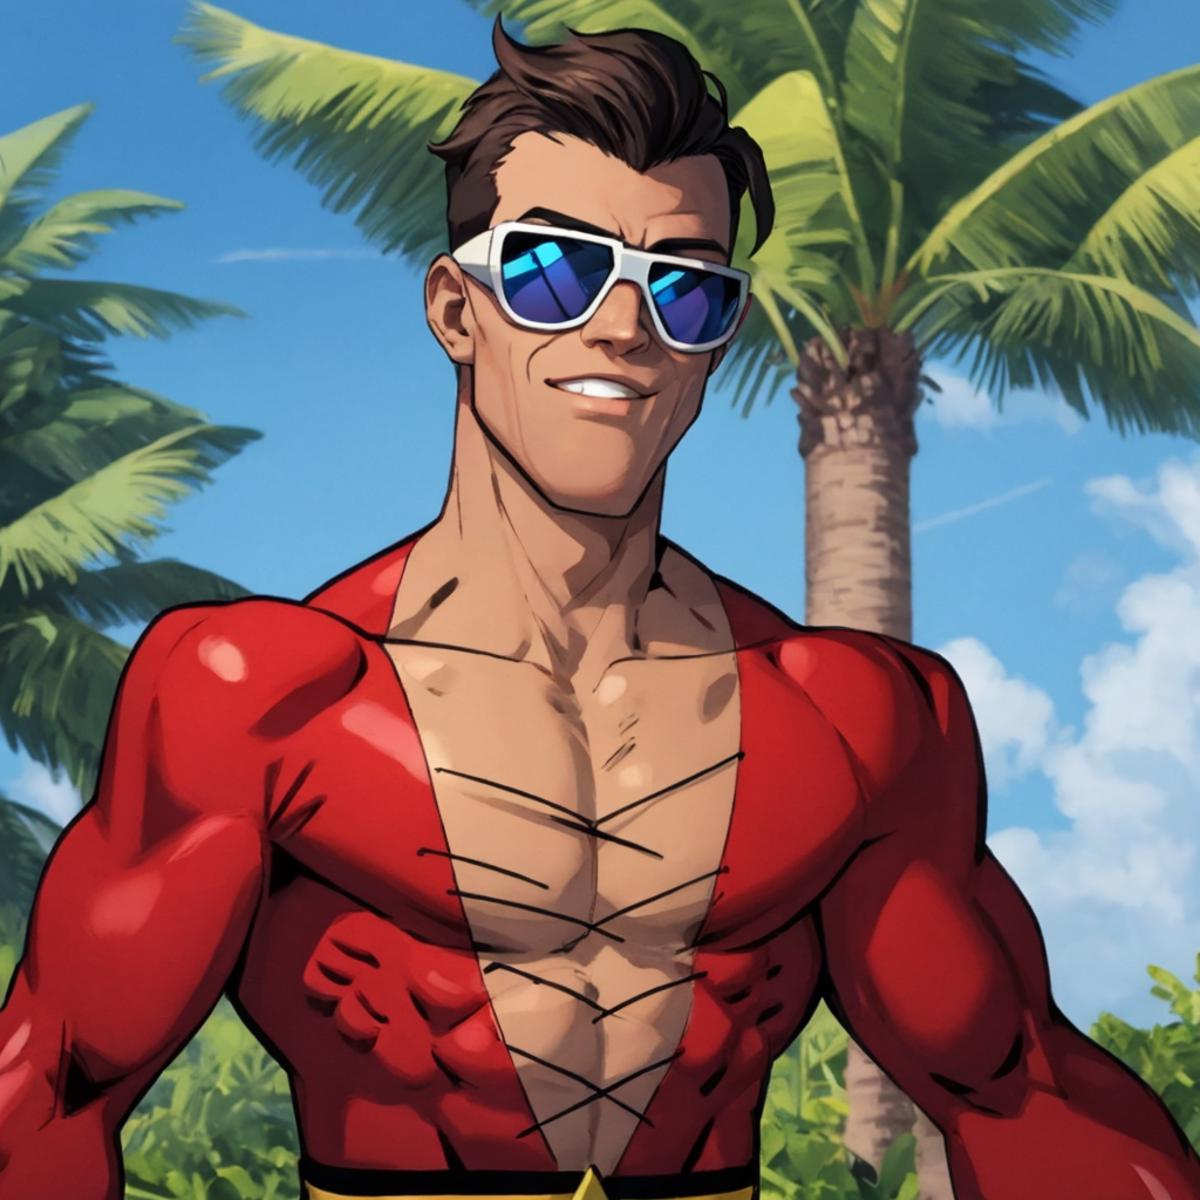 Plastic Man - DC image by MuscleEnjoyer